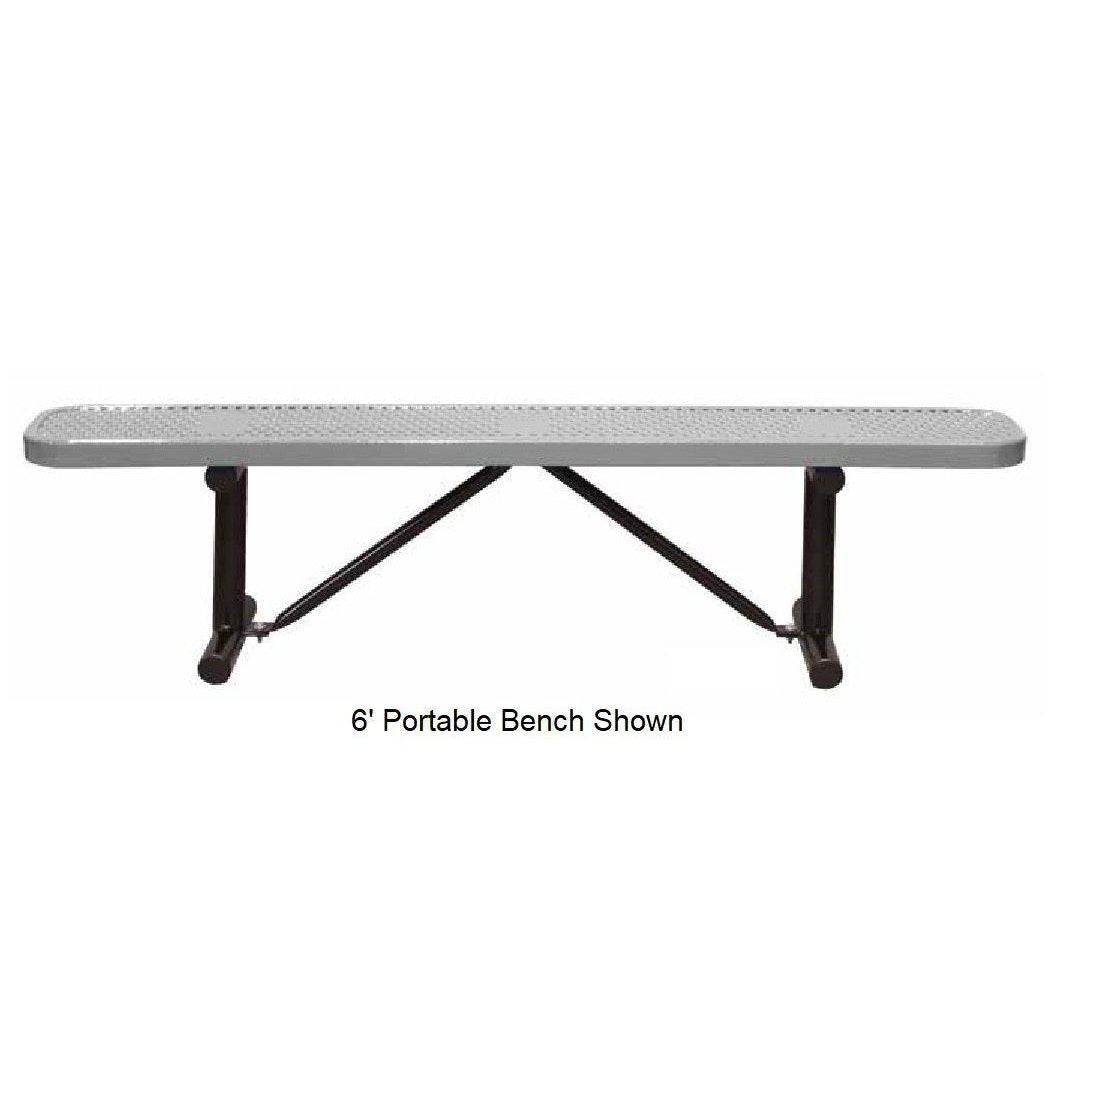 15’ Standard Perforated Bench Without Back, Portable